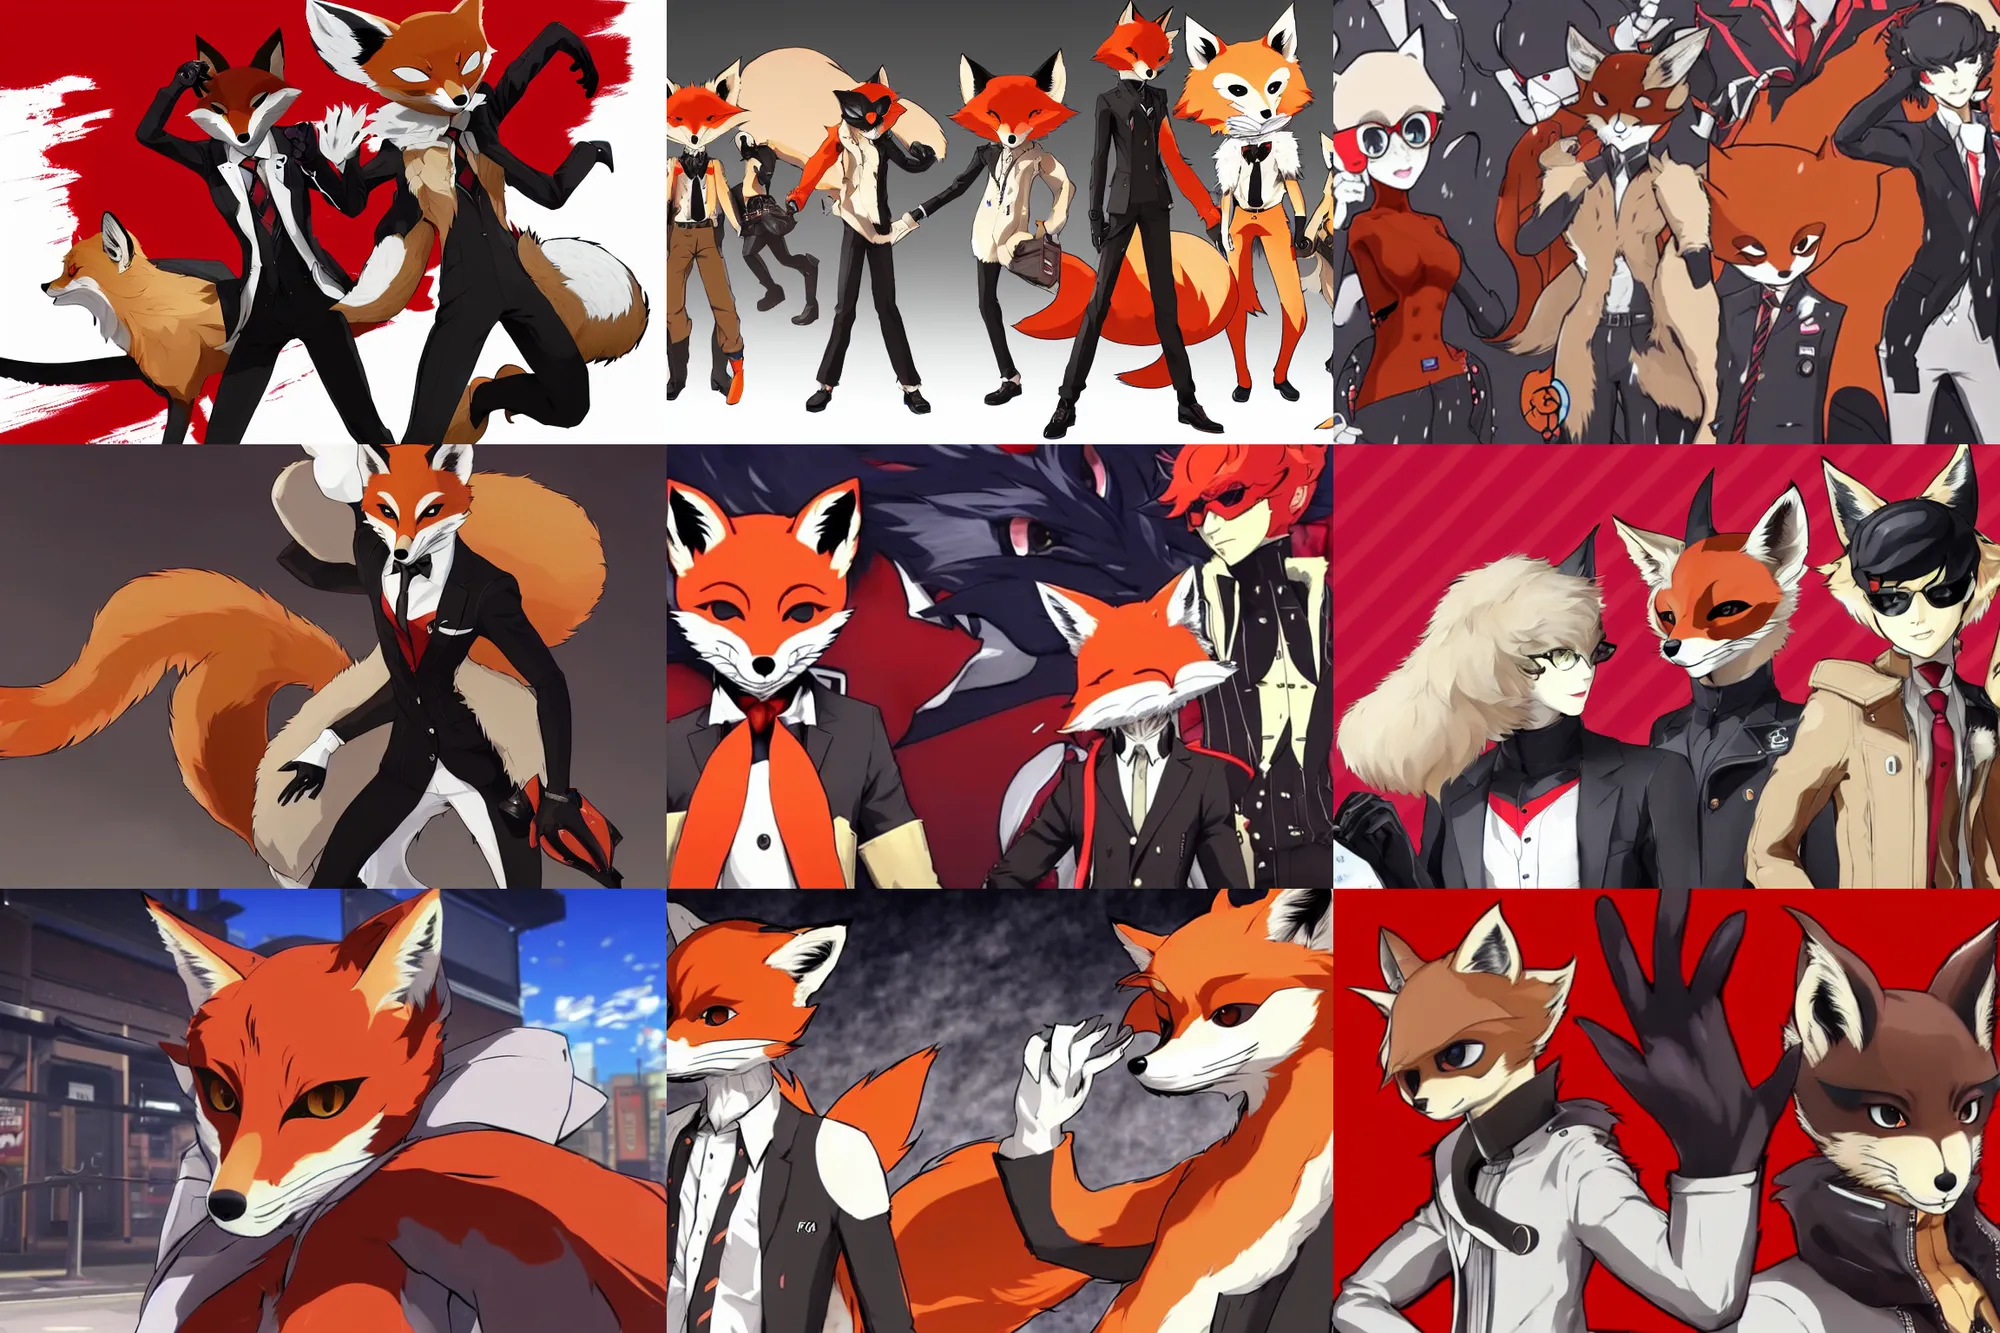 Prompt: a furry tan male fox on a persona 5 : royal ( by atlus ) video game splash screen, a furry male sandy sand - colored beige tan fur fox fursona ( has light brown hair ), persona 5 phantom thief style